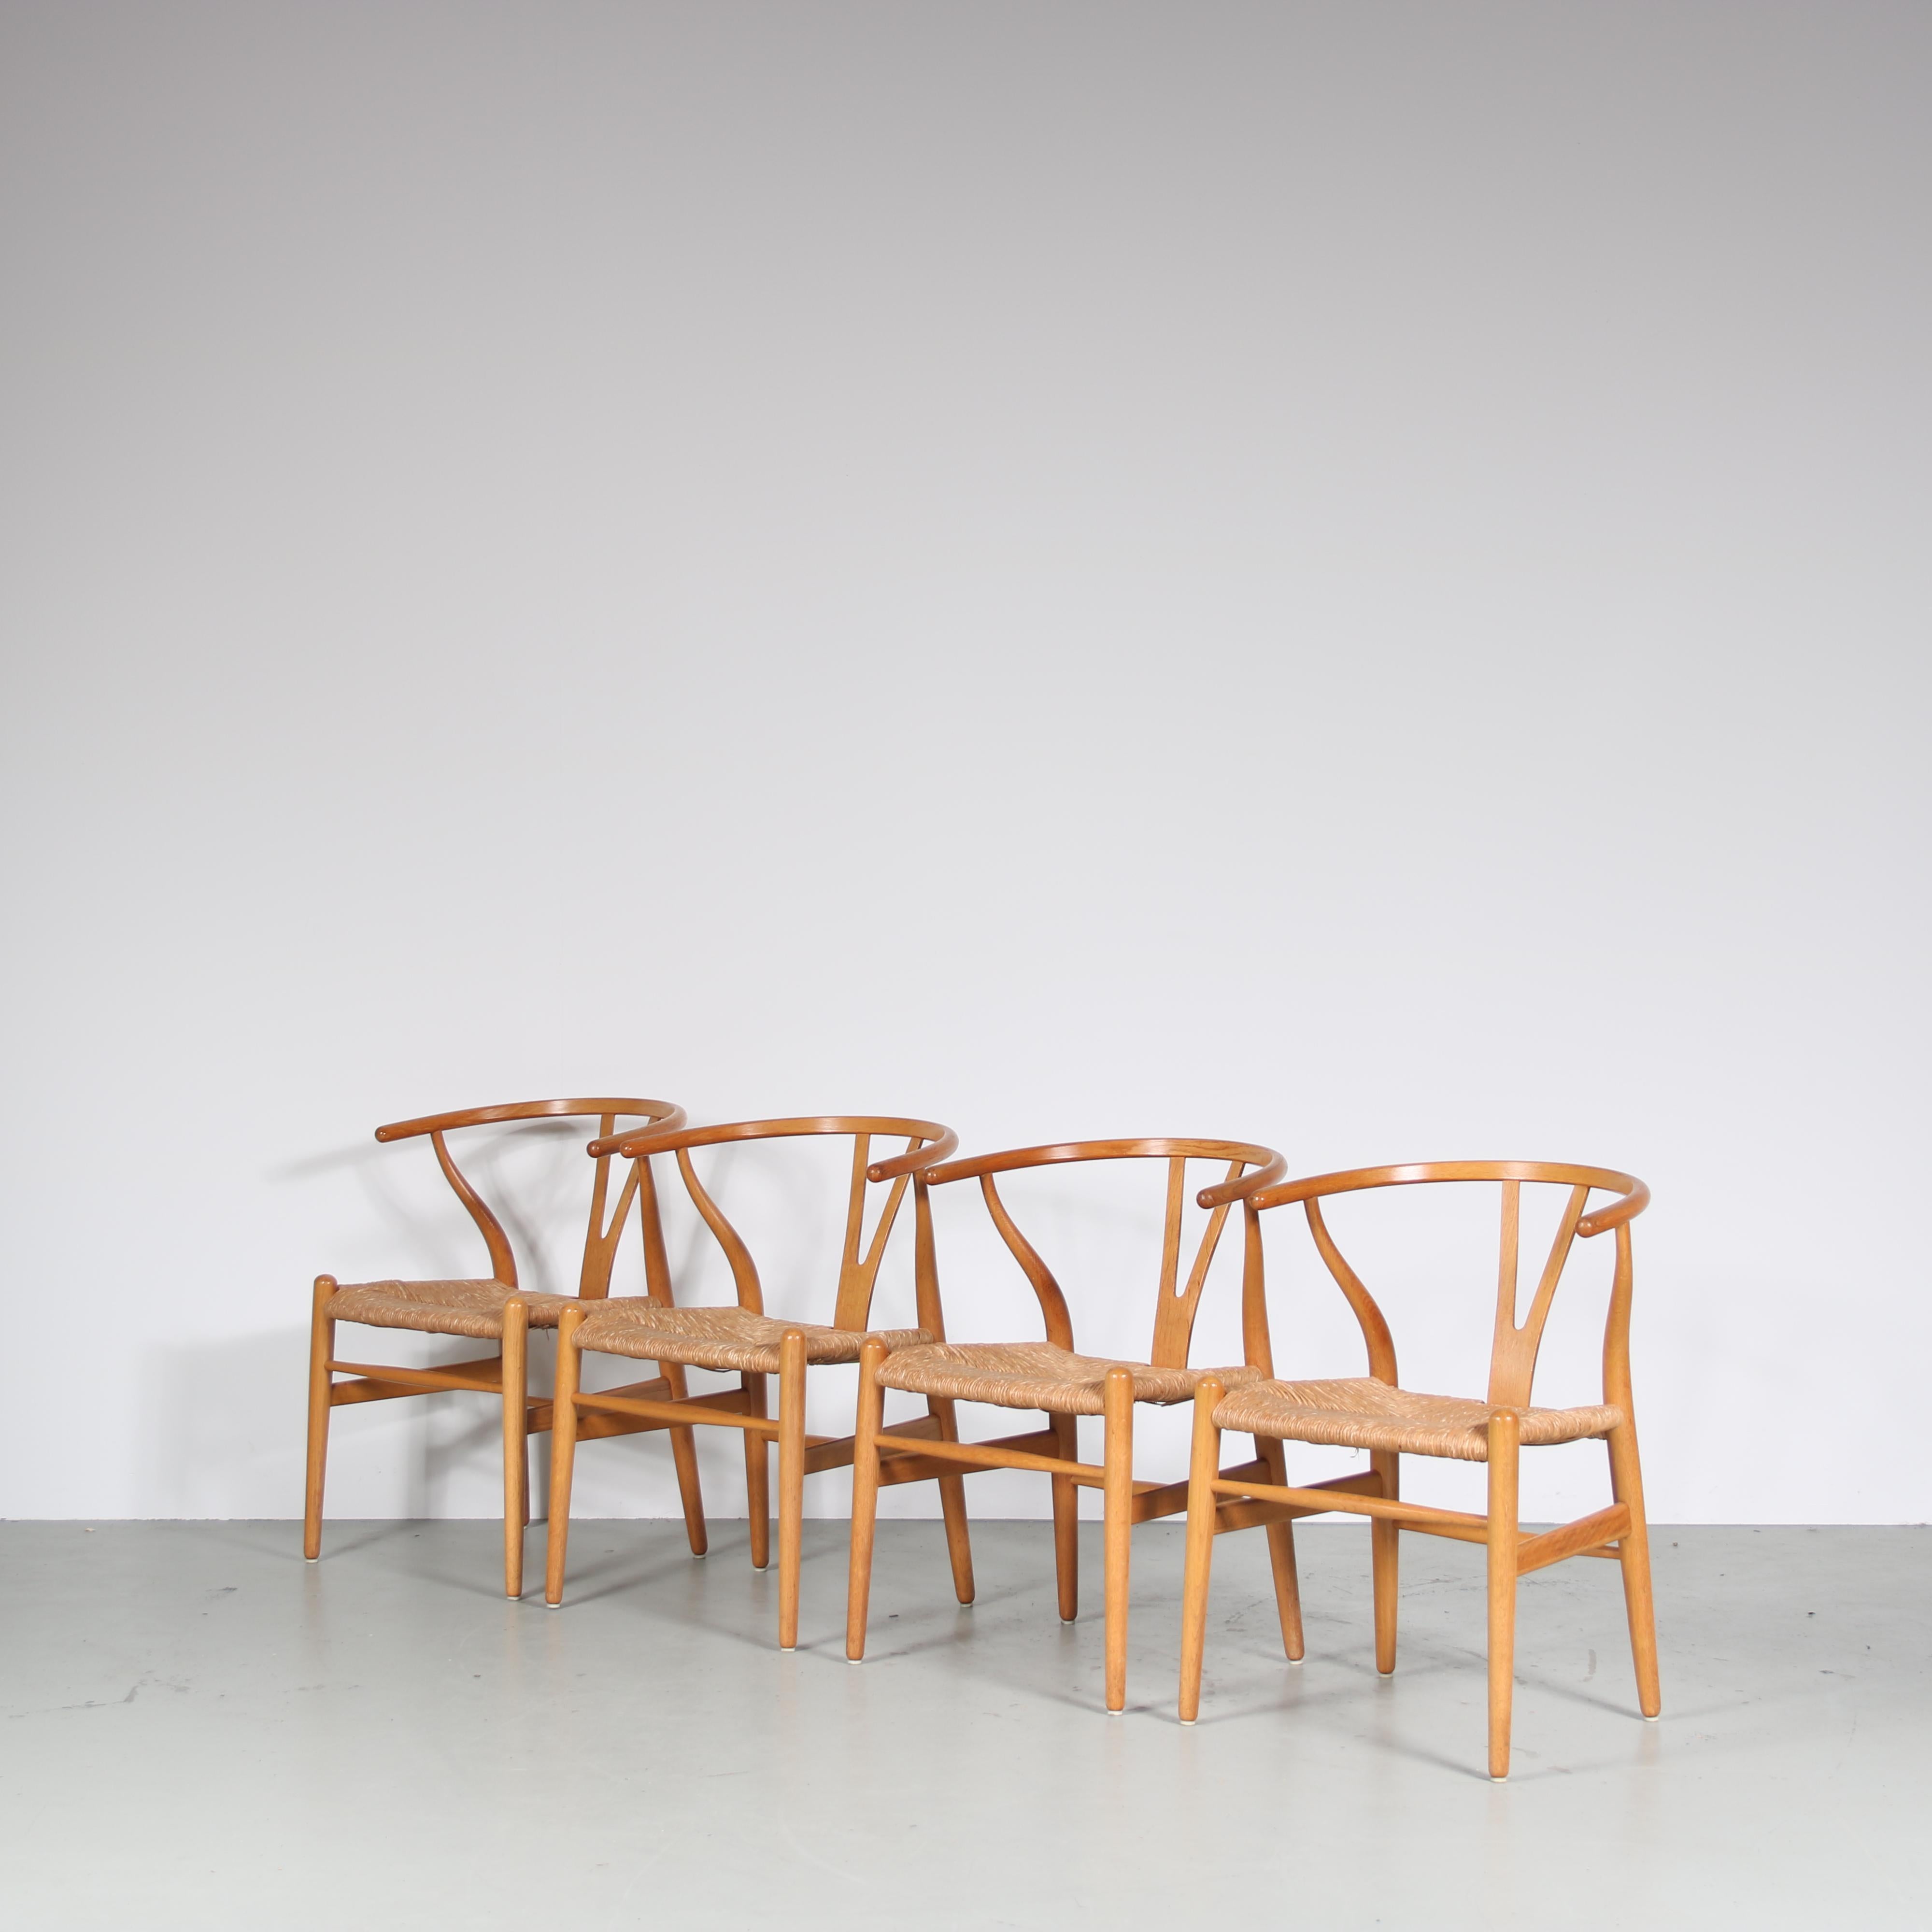 In the 1970s, renowned Danish designer Hans J. Wegner created this exquisite set of four oak wishbone dining chairs with rush seats, manufactured by Carl Hansen in Denmark. These chairs are a true testament to Wegner’s mastery of craftsmanship and